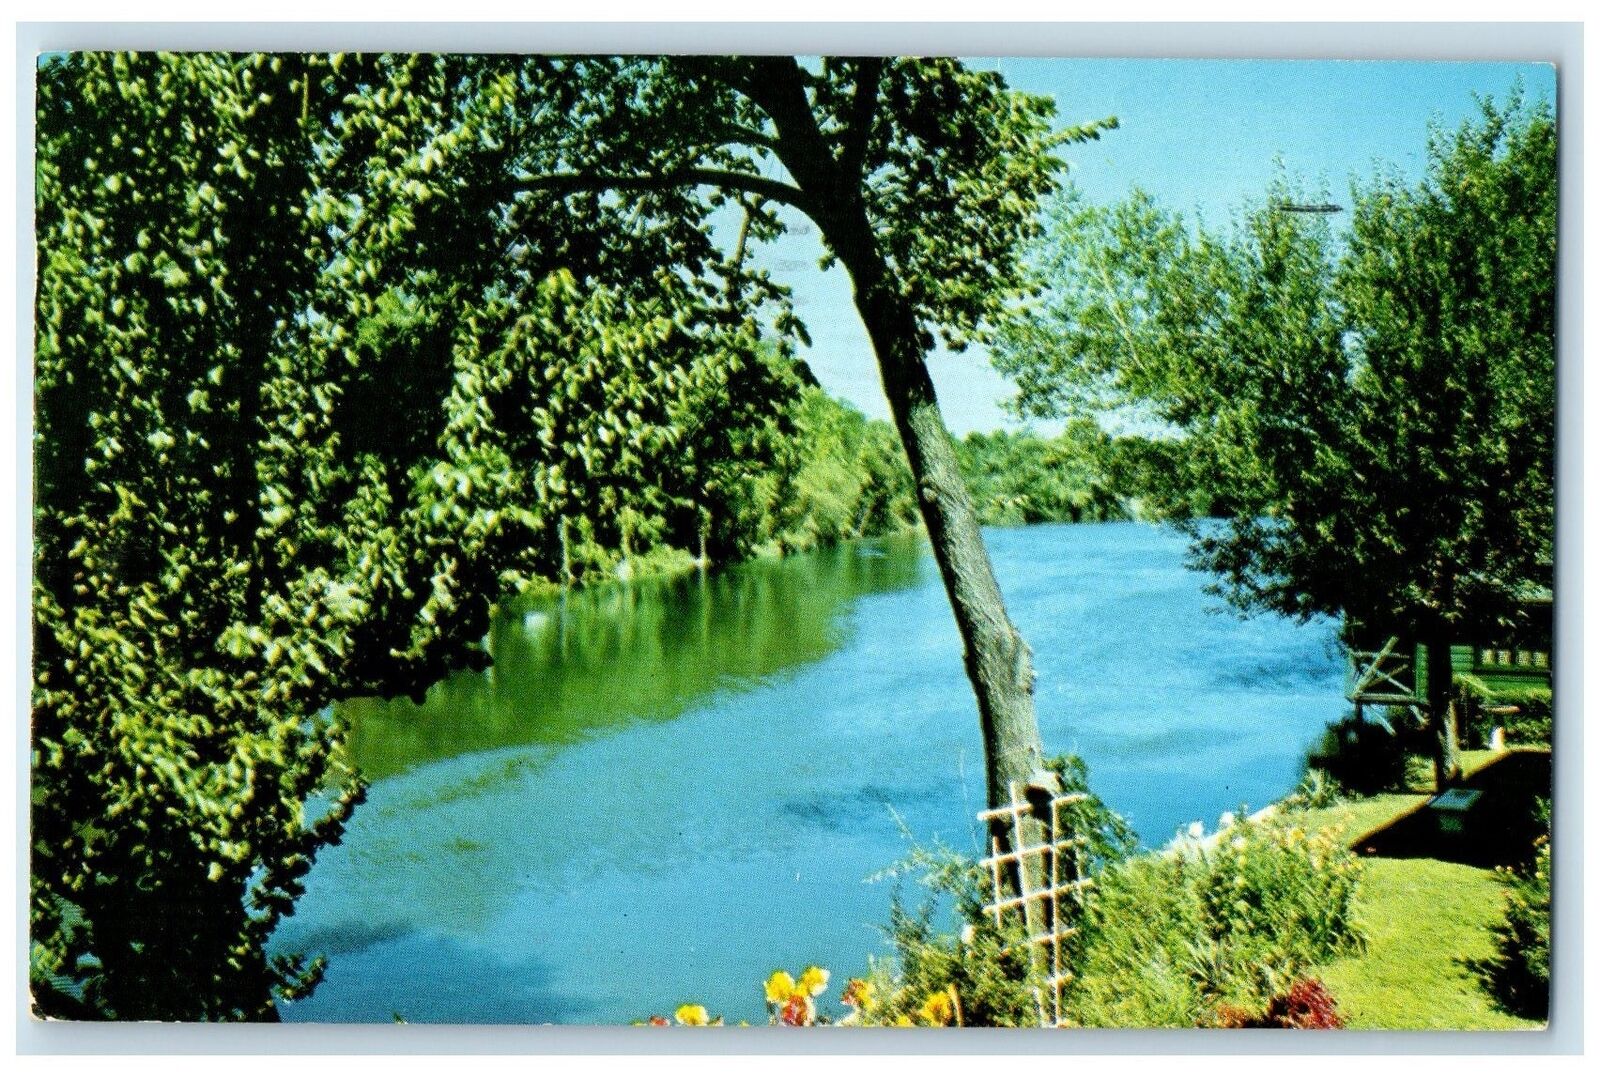 1961 Scenic View St. Joseph River Trees Flowers Elkhart Indiana Posted Postcard